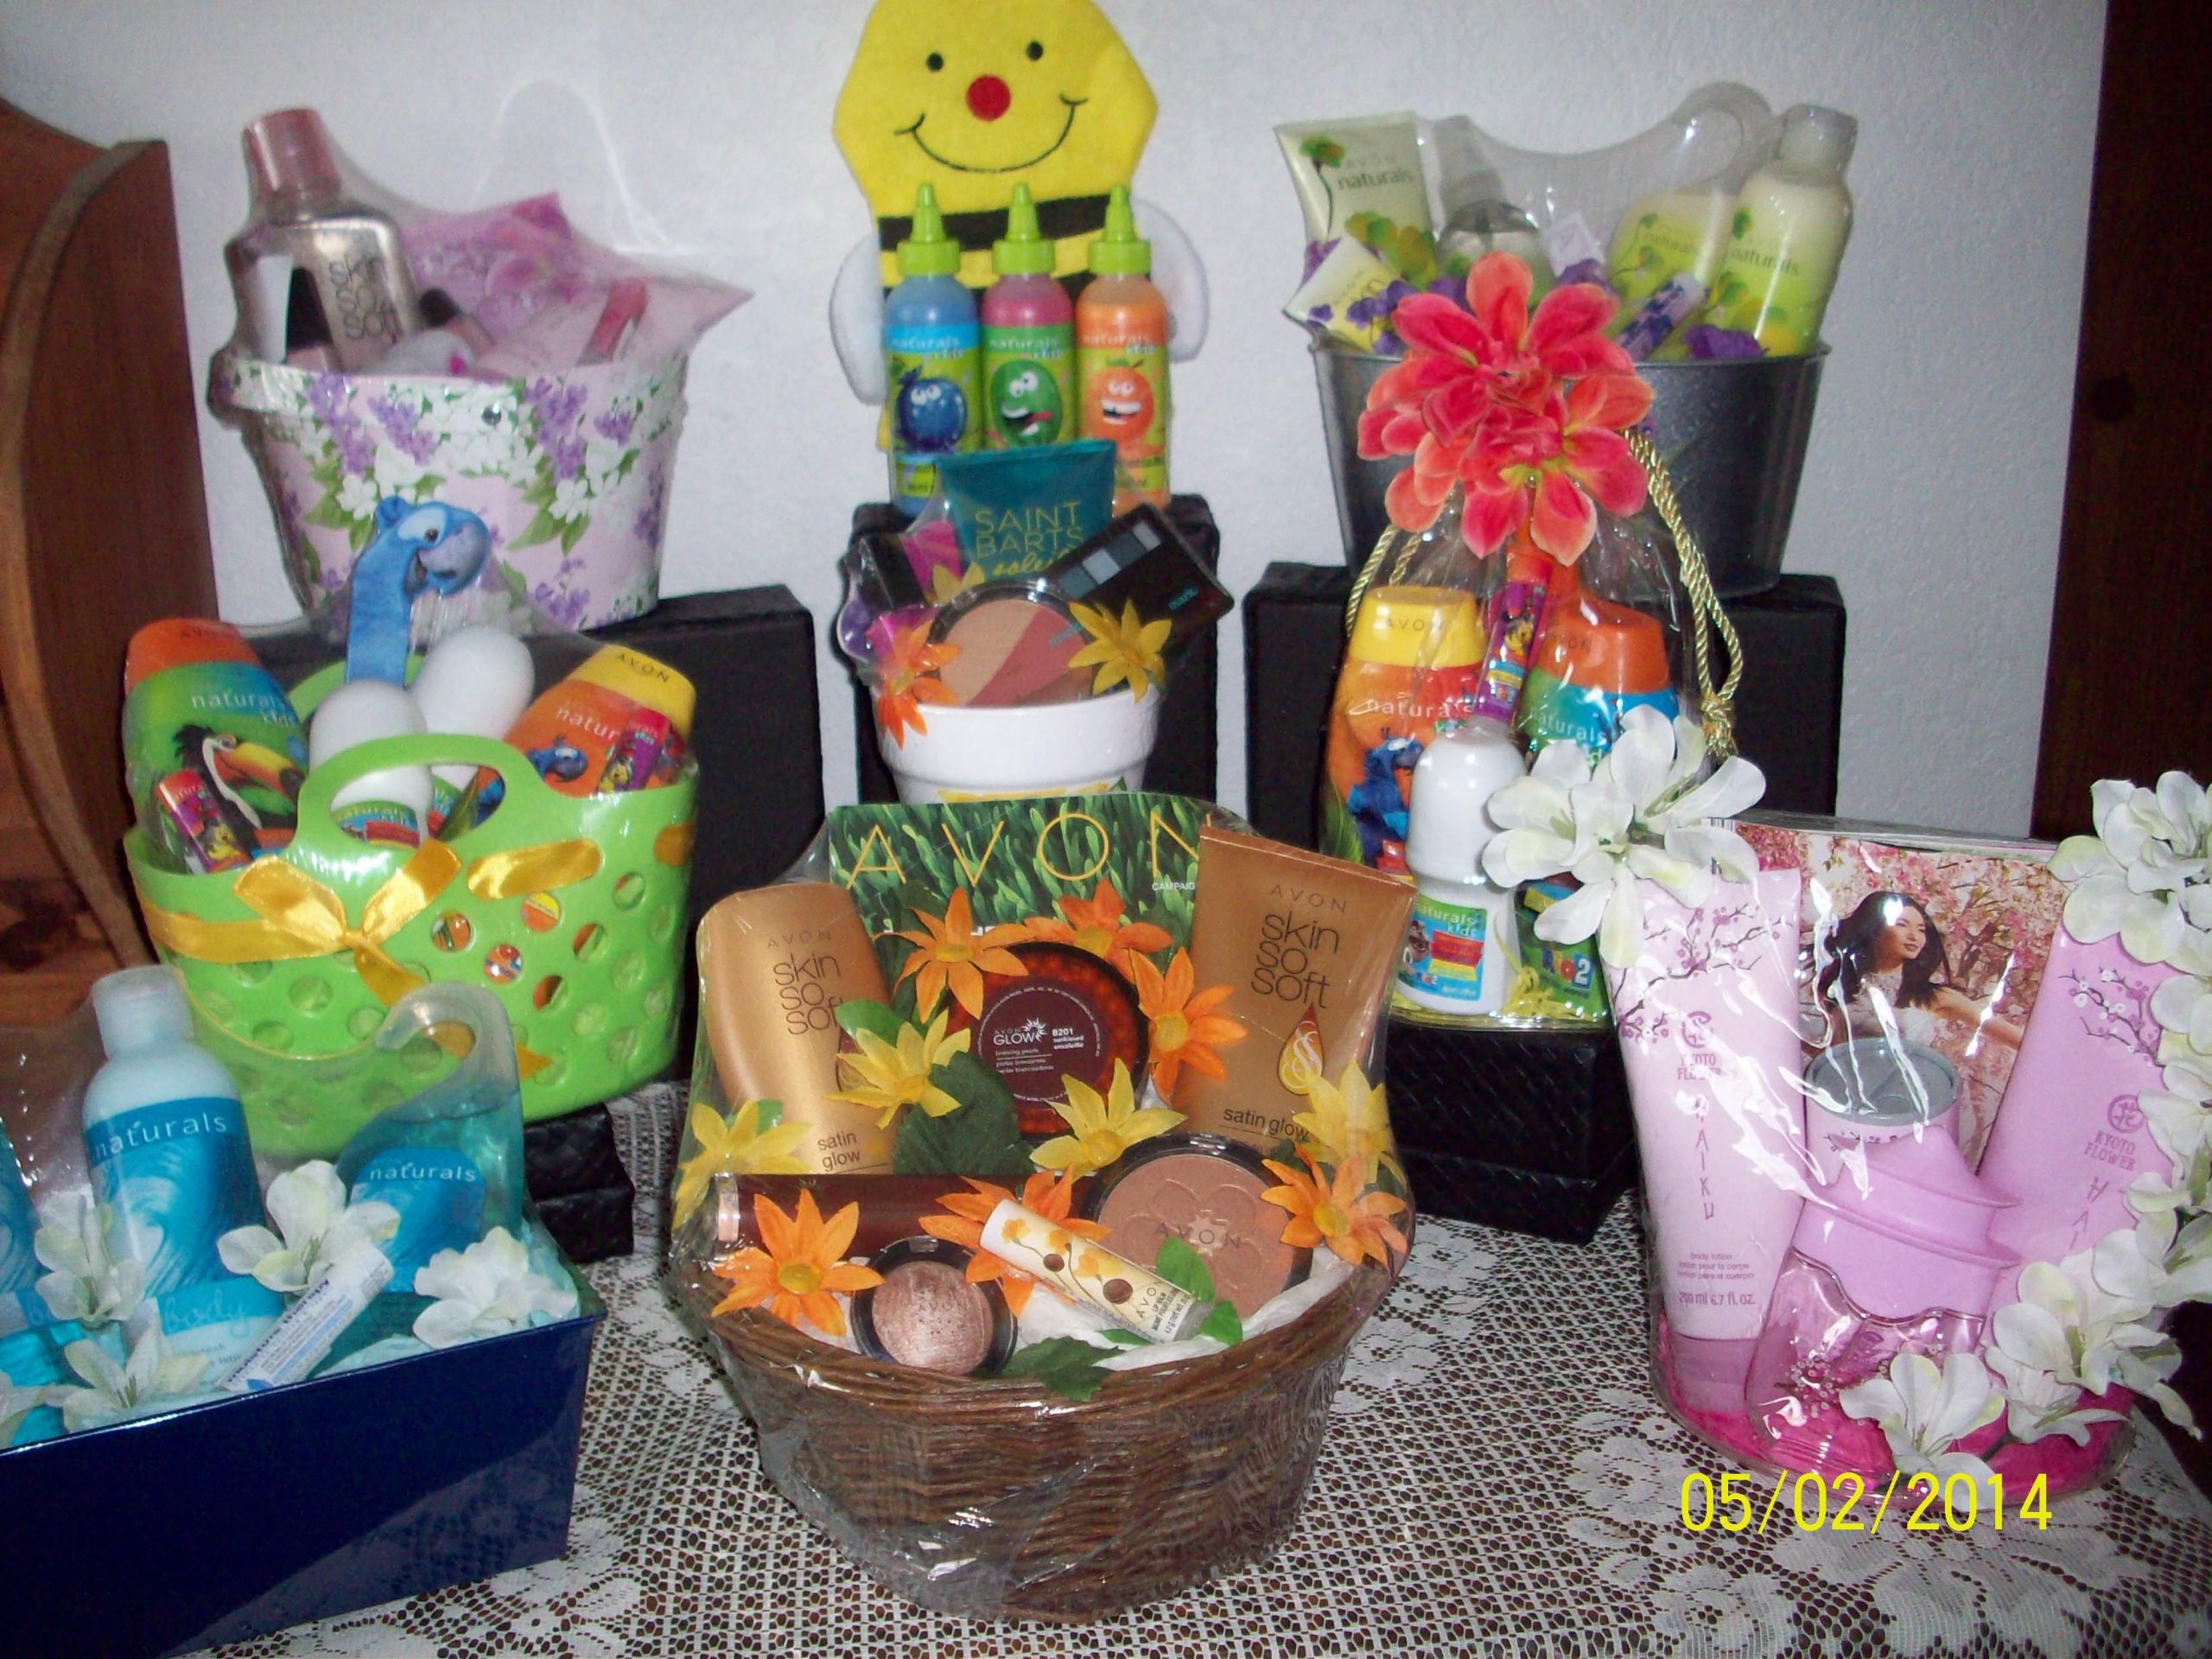 Avon Gift Basket Ideas
 Some of the t baskets I made up using Avon Products I